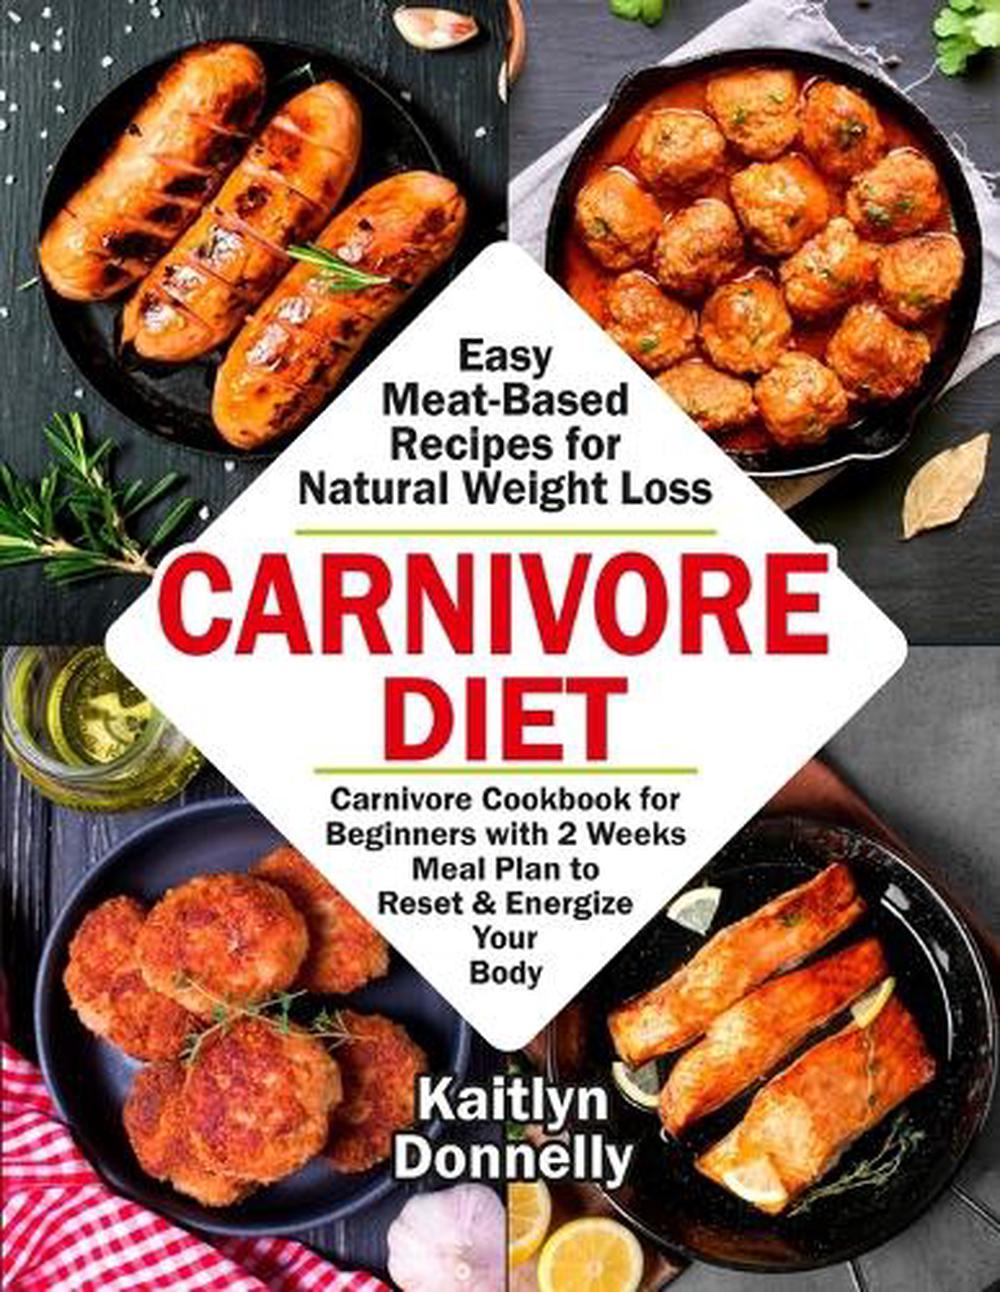 Carnivore Diet: Easy Meat Based Recipes for Natural Weight Loss